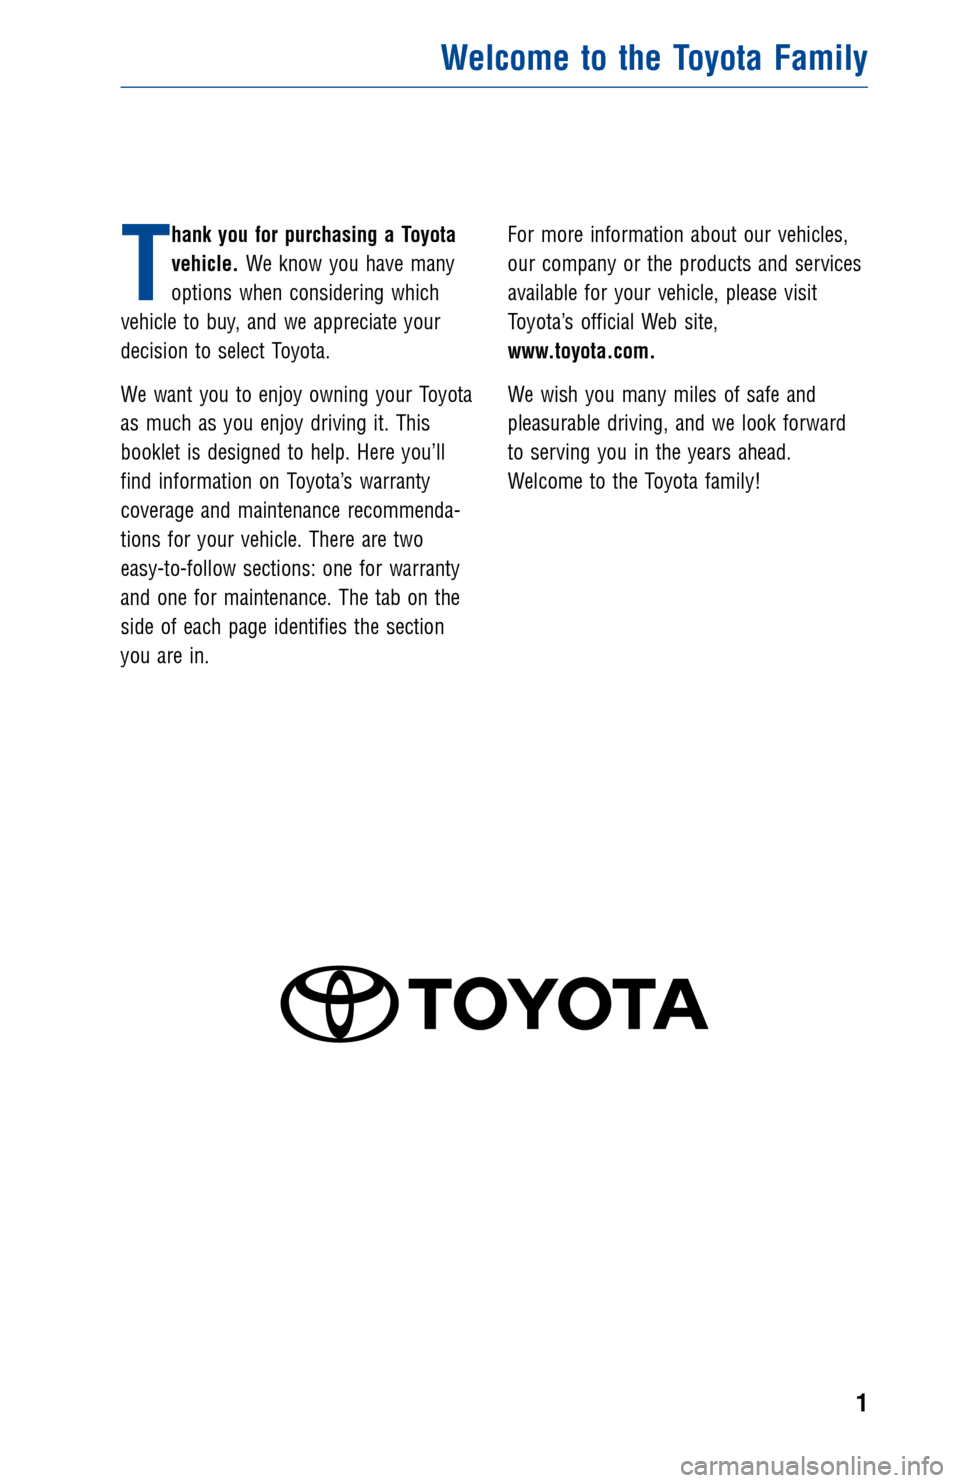 TOYOTA LAND CRUISER 2014 J200 Warranty And Maintenance Guide JOBNAME: 1491133-2014-lndWG-E PAGE: 1 SESS: 11 OUTPUT: Fri Jul 12 10:06:01 2013 
/tweddle/toyota/sched-maint/1491133-en-lnd/wg
T
hank you for purchasing a Toyota 
vehicle. We know you have many 
optio